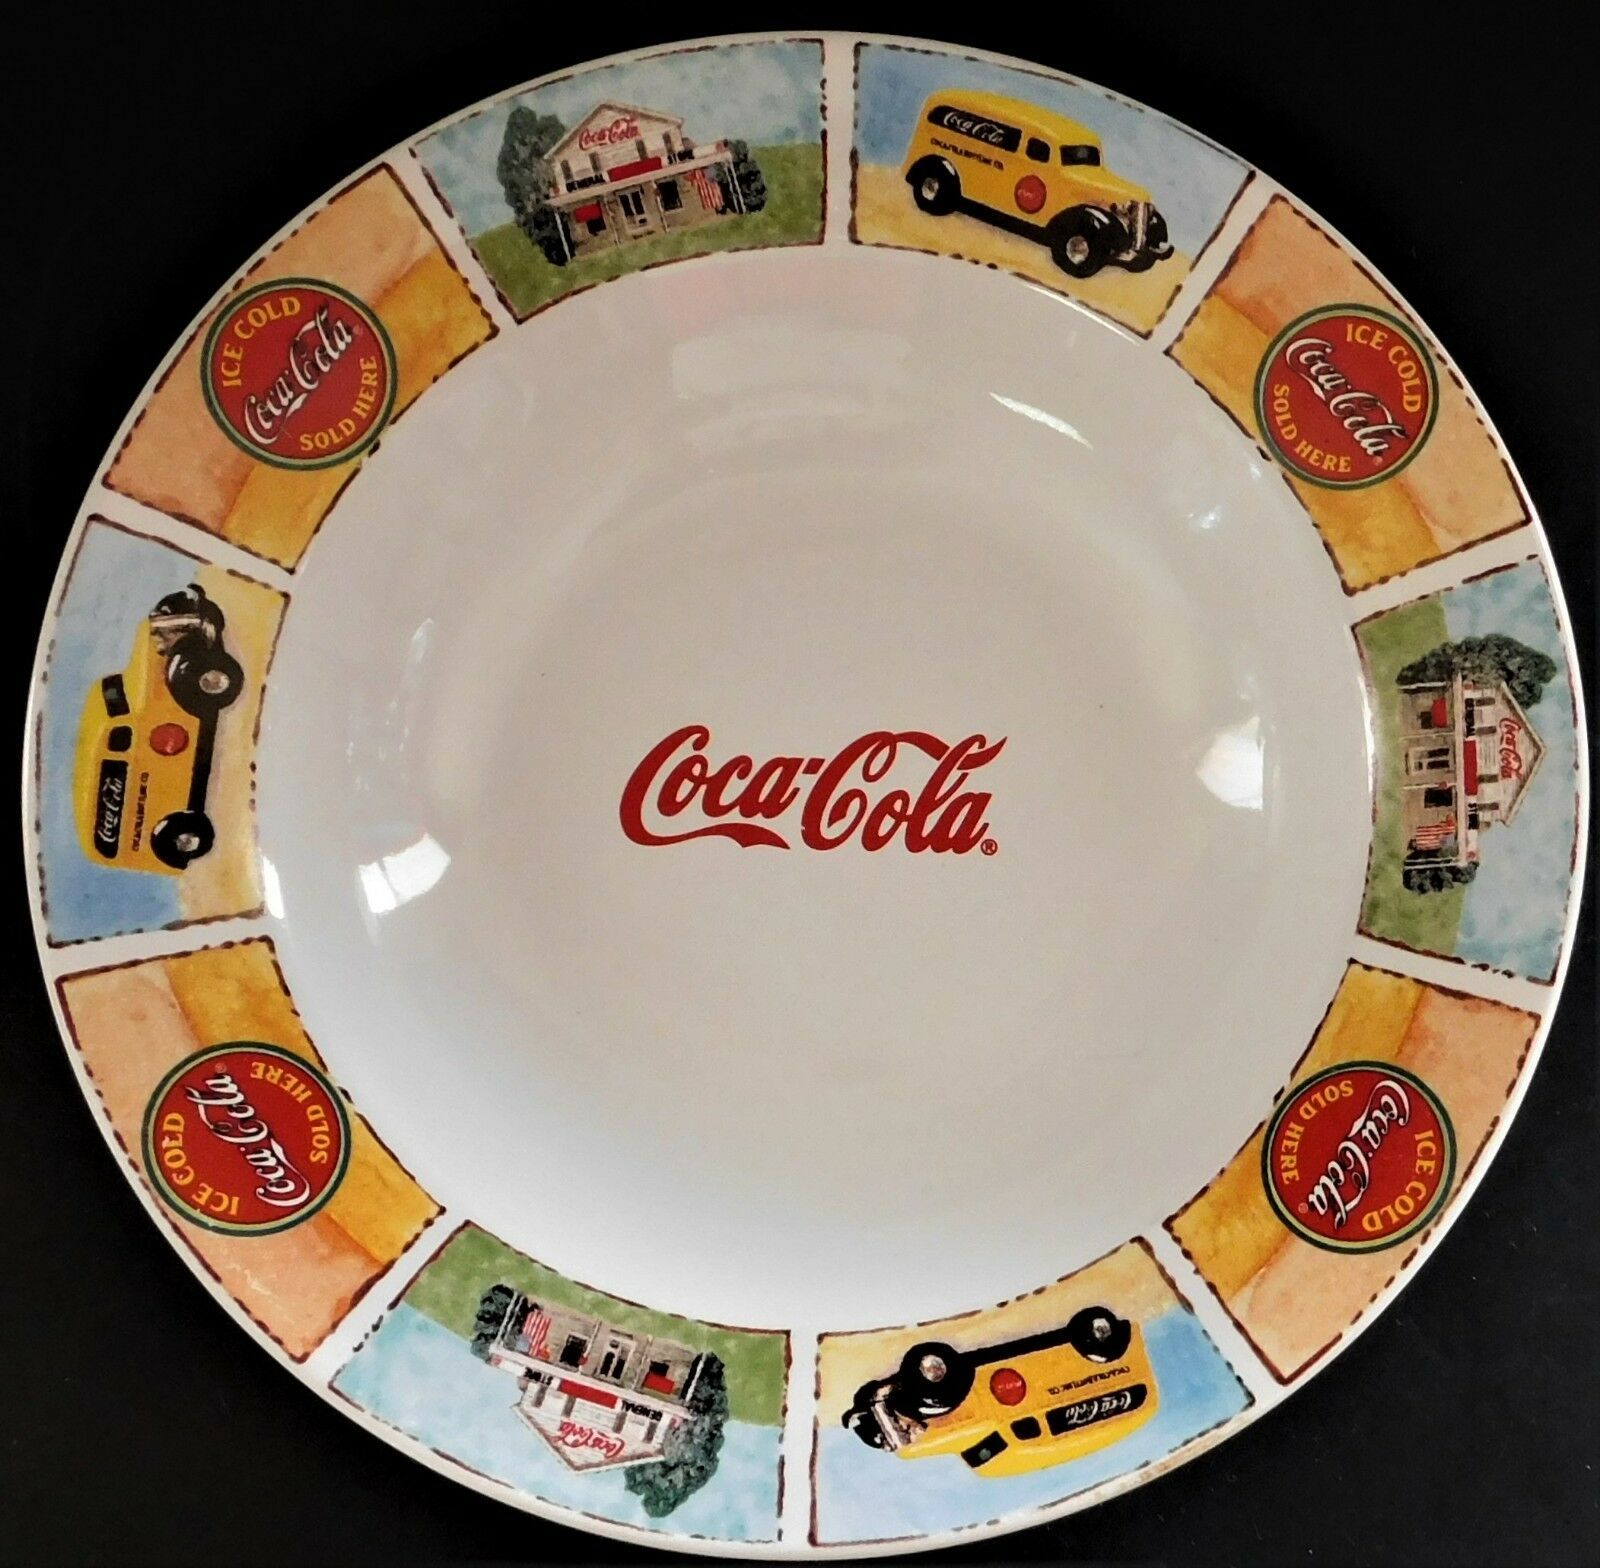 Gibson Coca Cola 9" Salad or Soup Bowl Good Old Days Ice Cold Coke Vintage Retro - $21.77